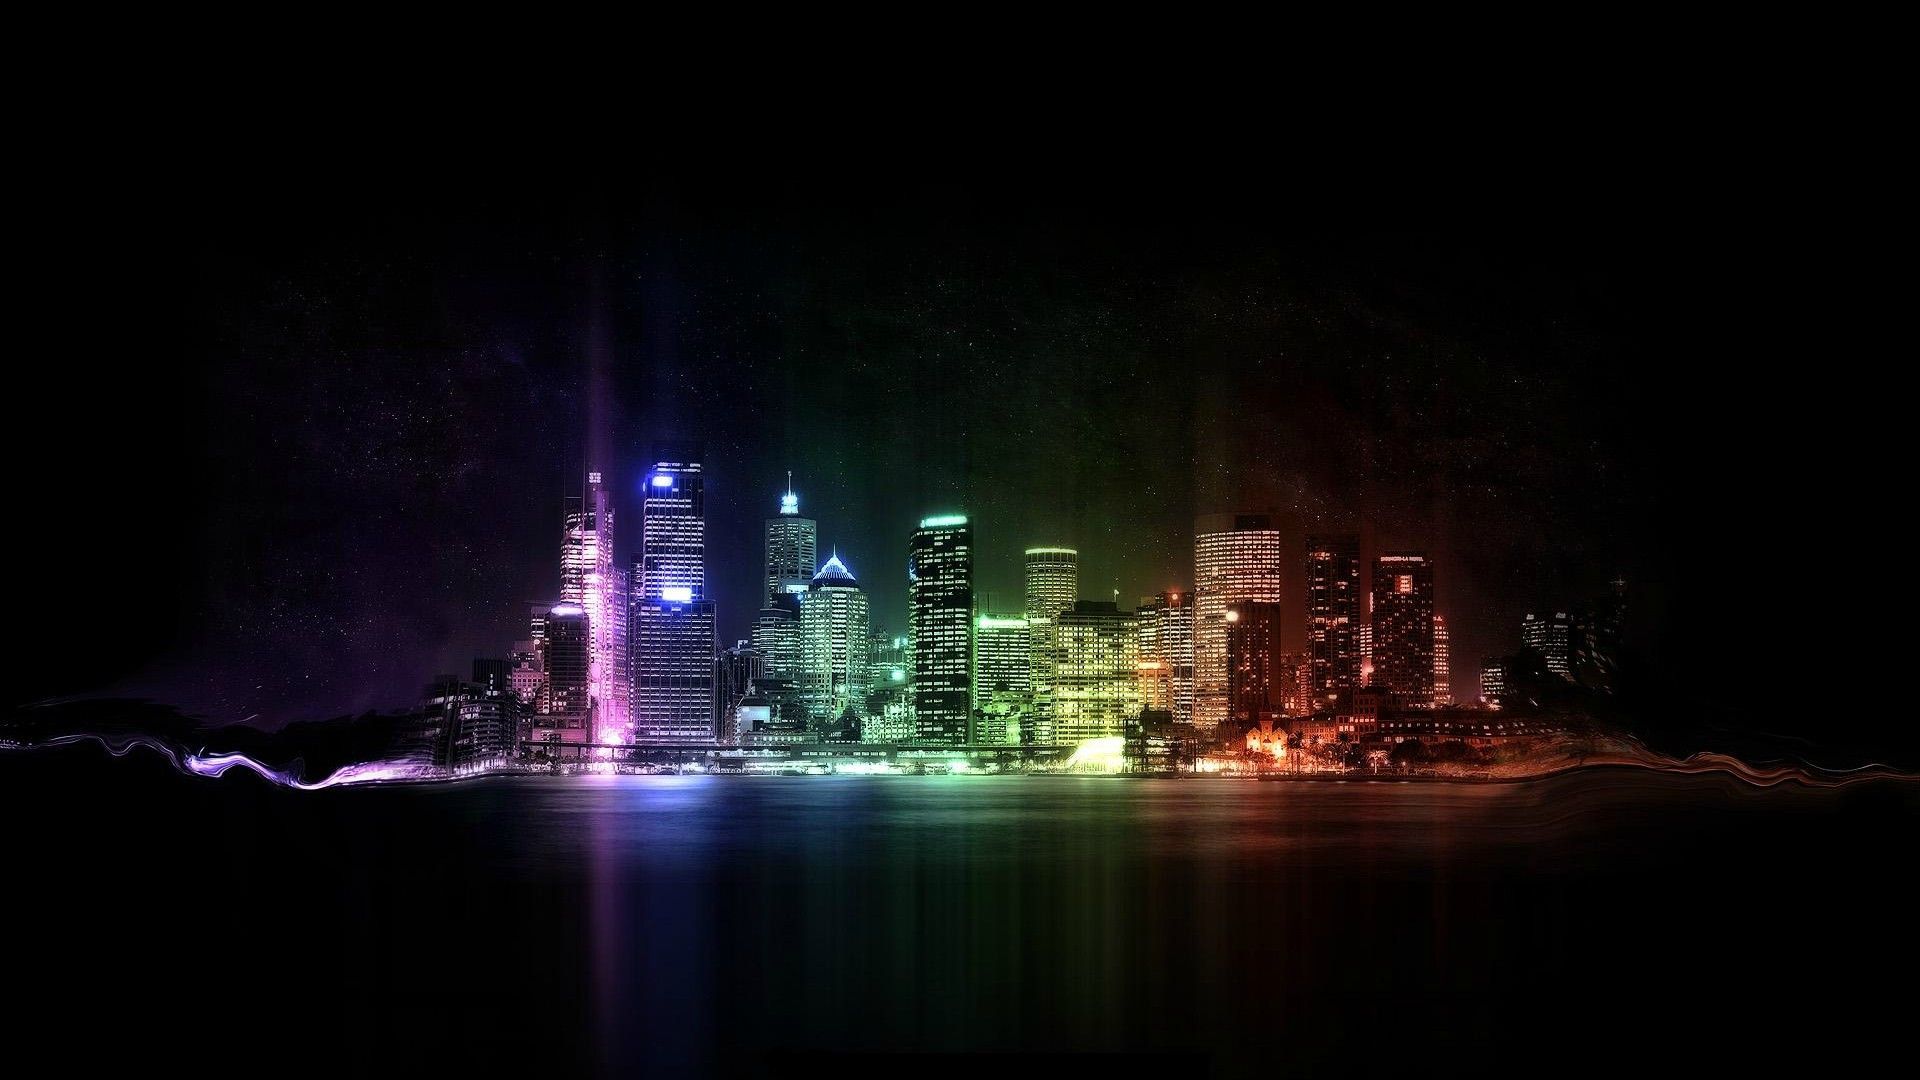 Awesome City at Night Wallpaper Free Awesome City at Night ...